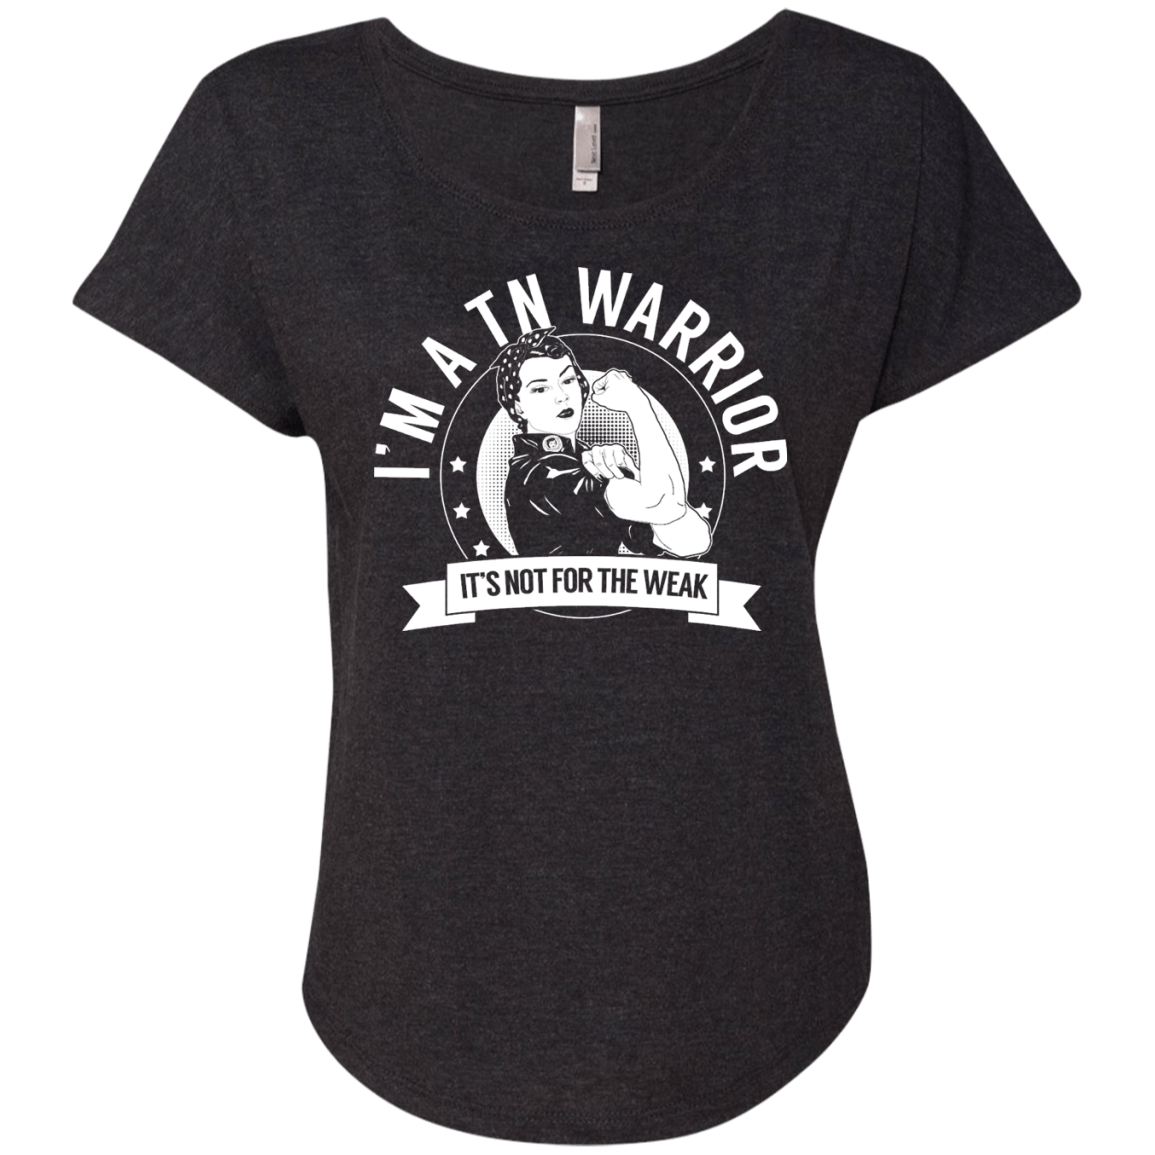 Trigeminal Neuralgia - TN Warrior Not For The Weak Dolman Sleeve - The Unchargeables